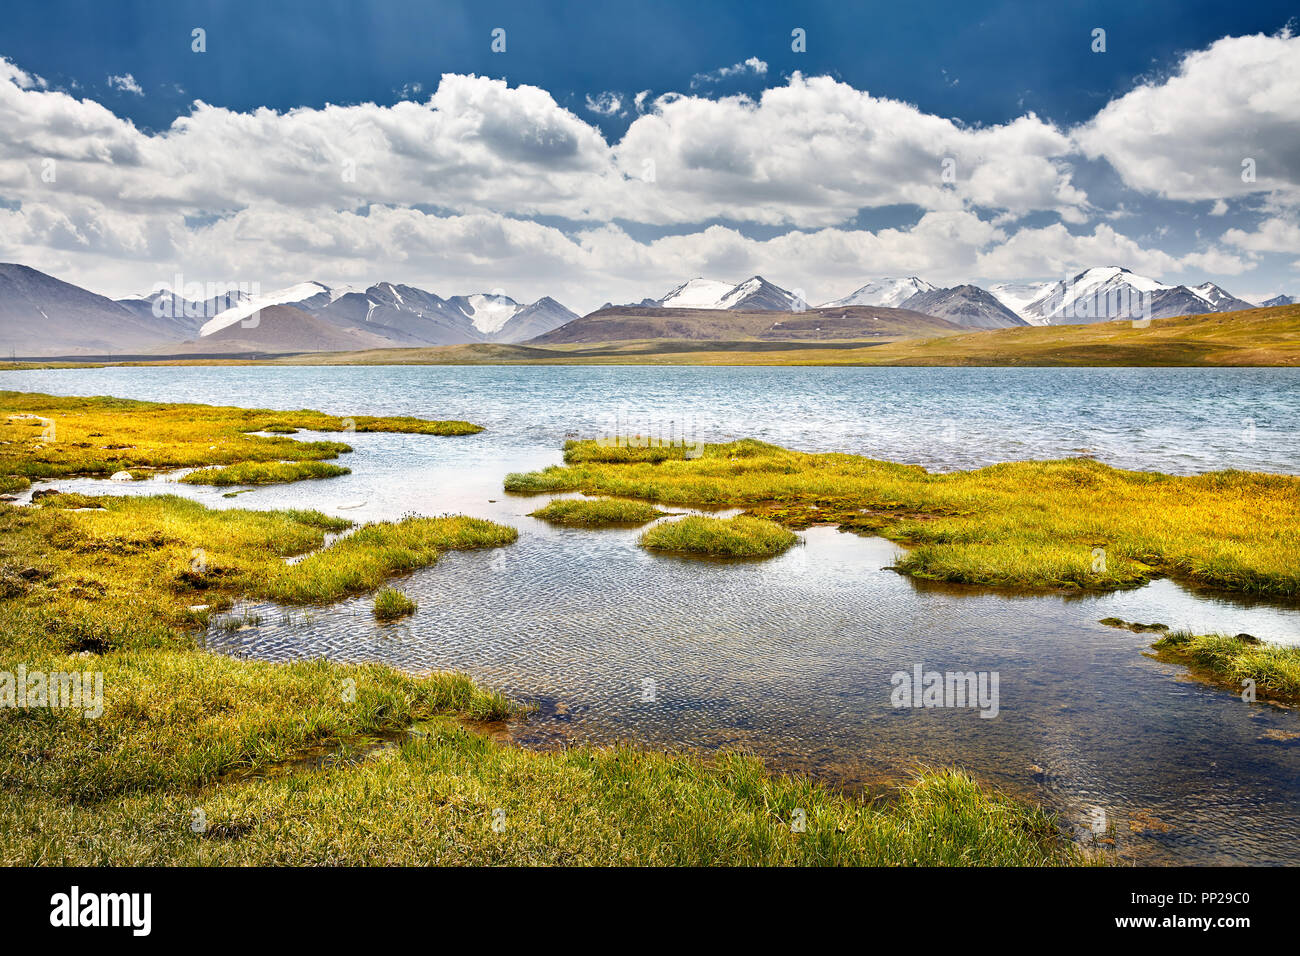 Mountain Lake in the valley against cloudy sky in Kyrgyzstan Stock Photo